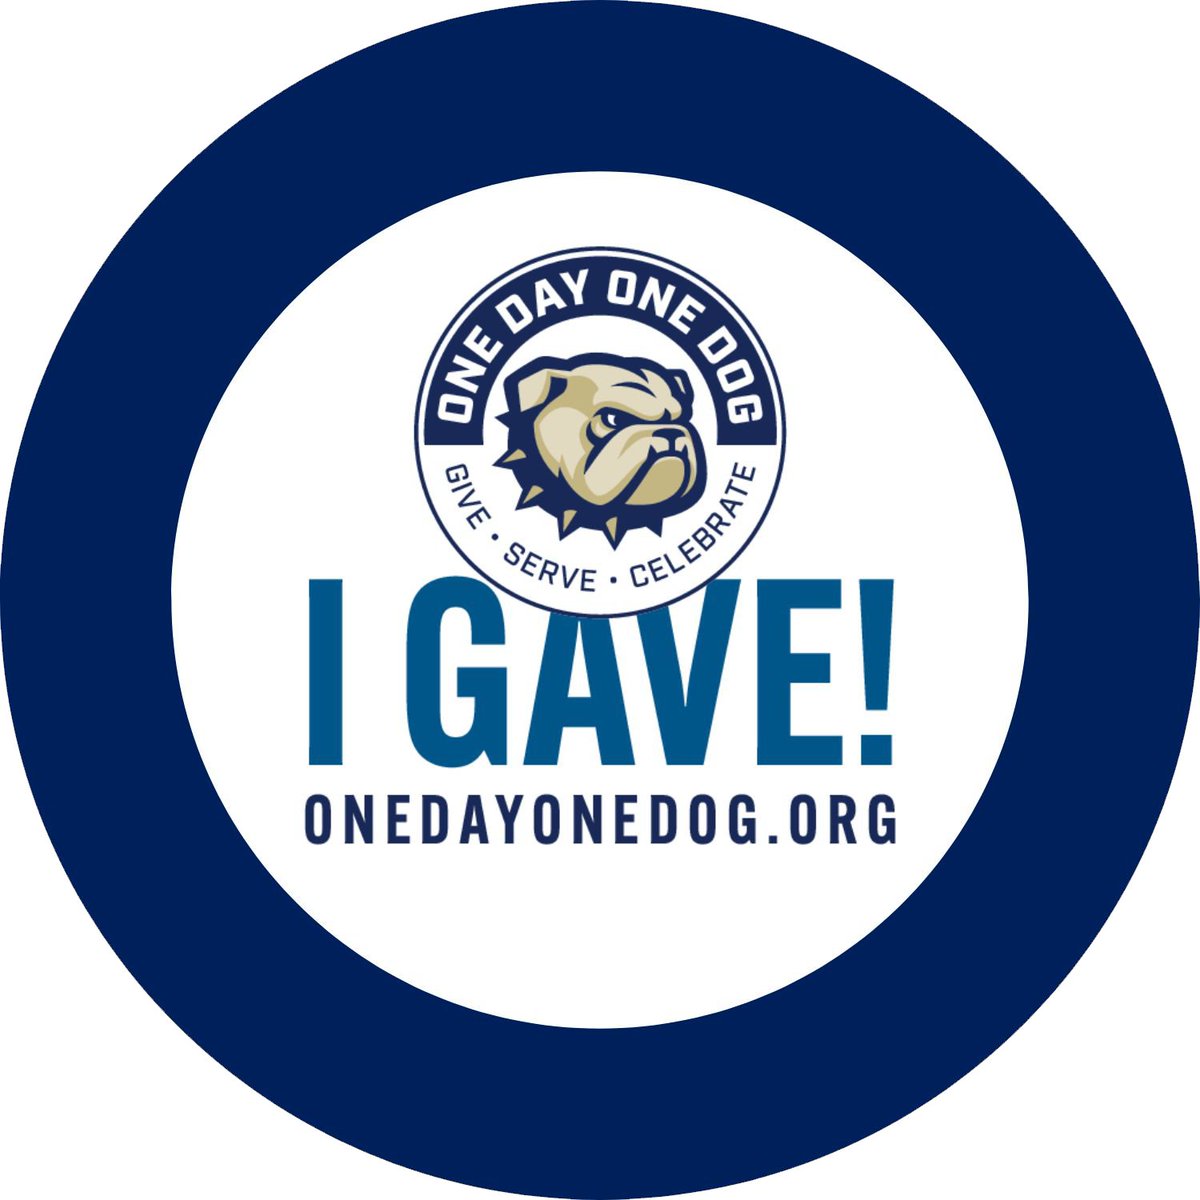 Today is the day we've all been waiting for - One Day, One Dog is finally HERE! Thank you for being a part of this incredible journey and for your unwavering dedication to Wingate University. Go Bulldogs! . onedayonedog.org . #ODOD #WingateUniv #LabOfDifferenceMaking